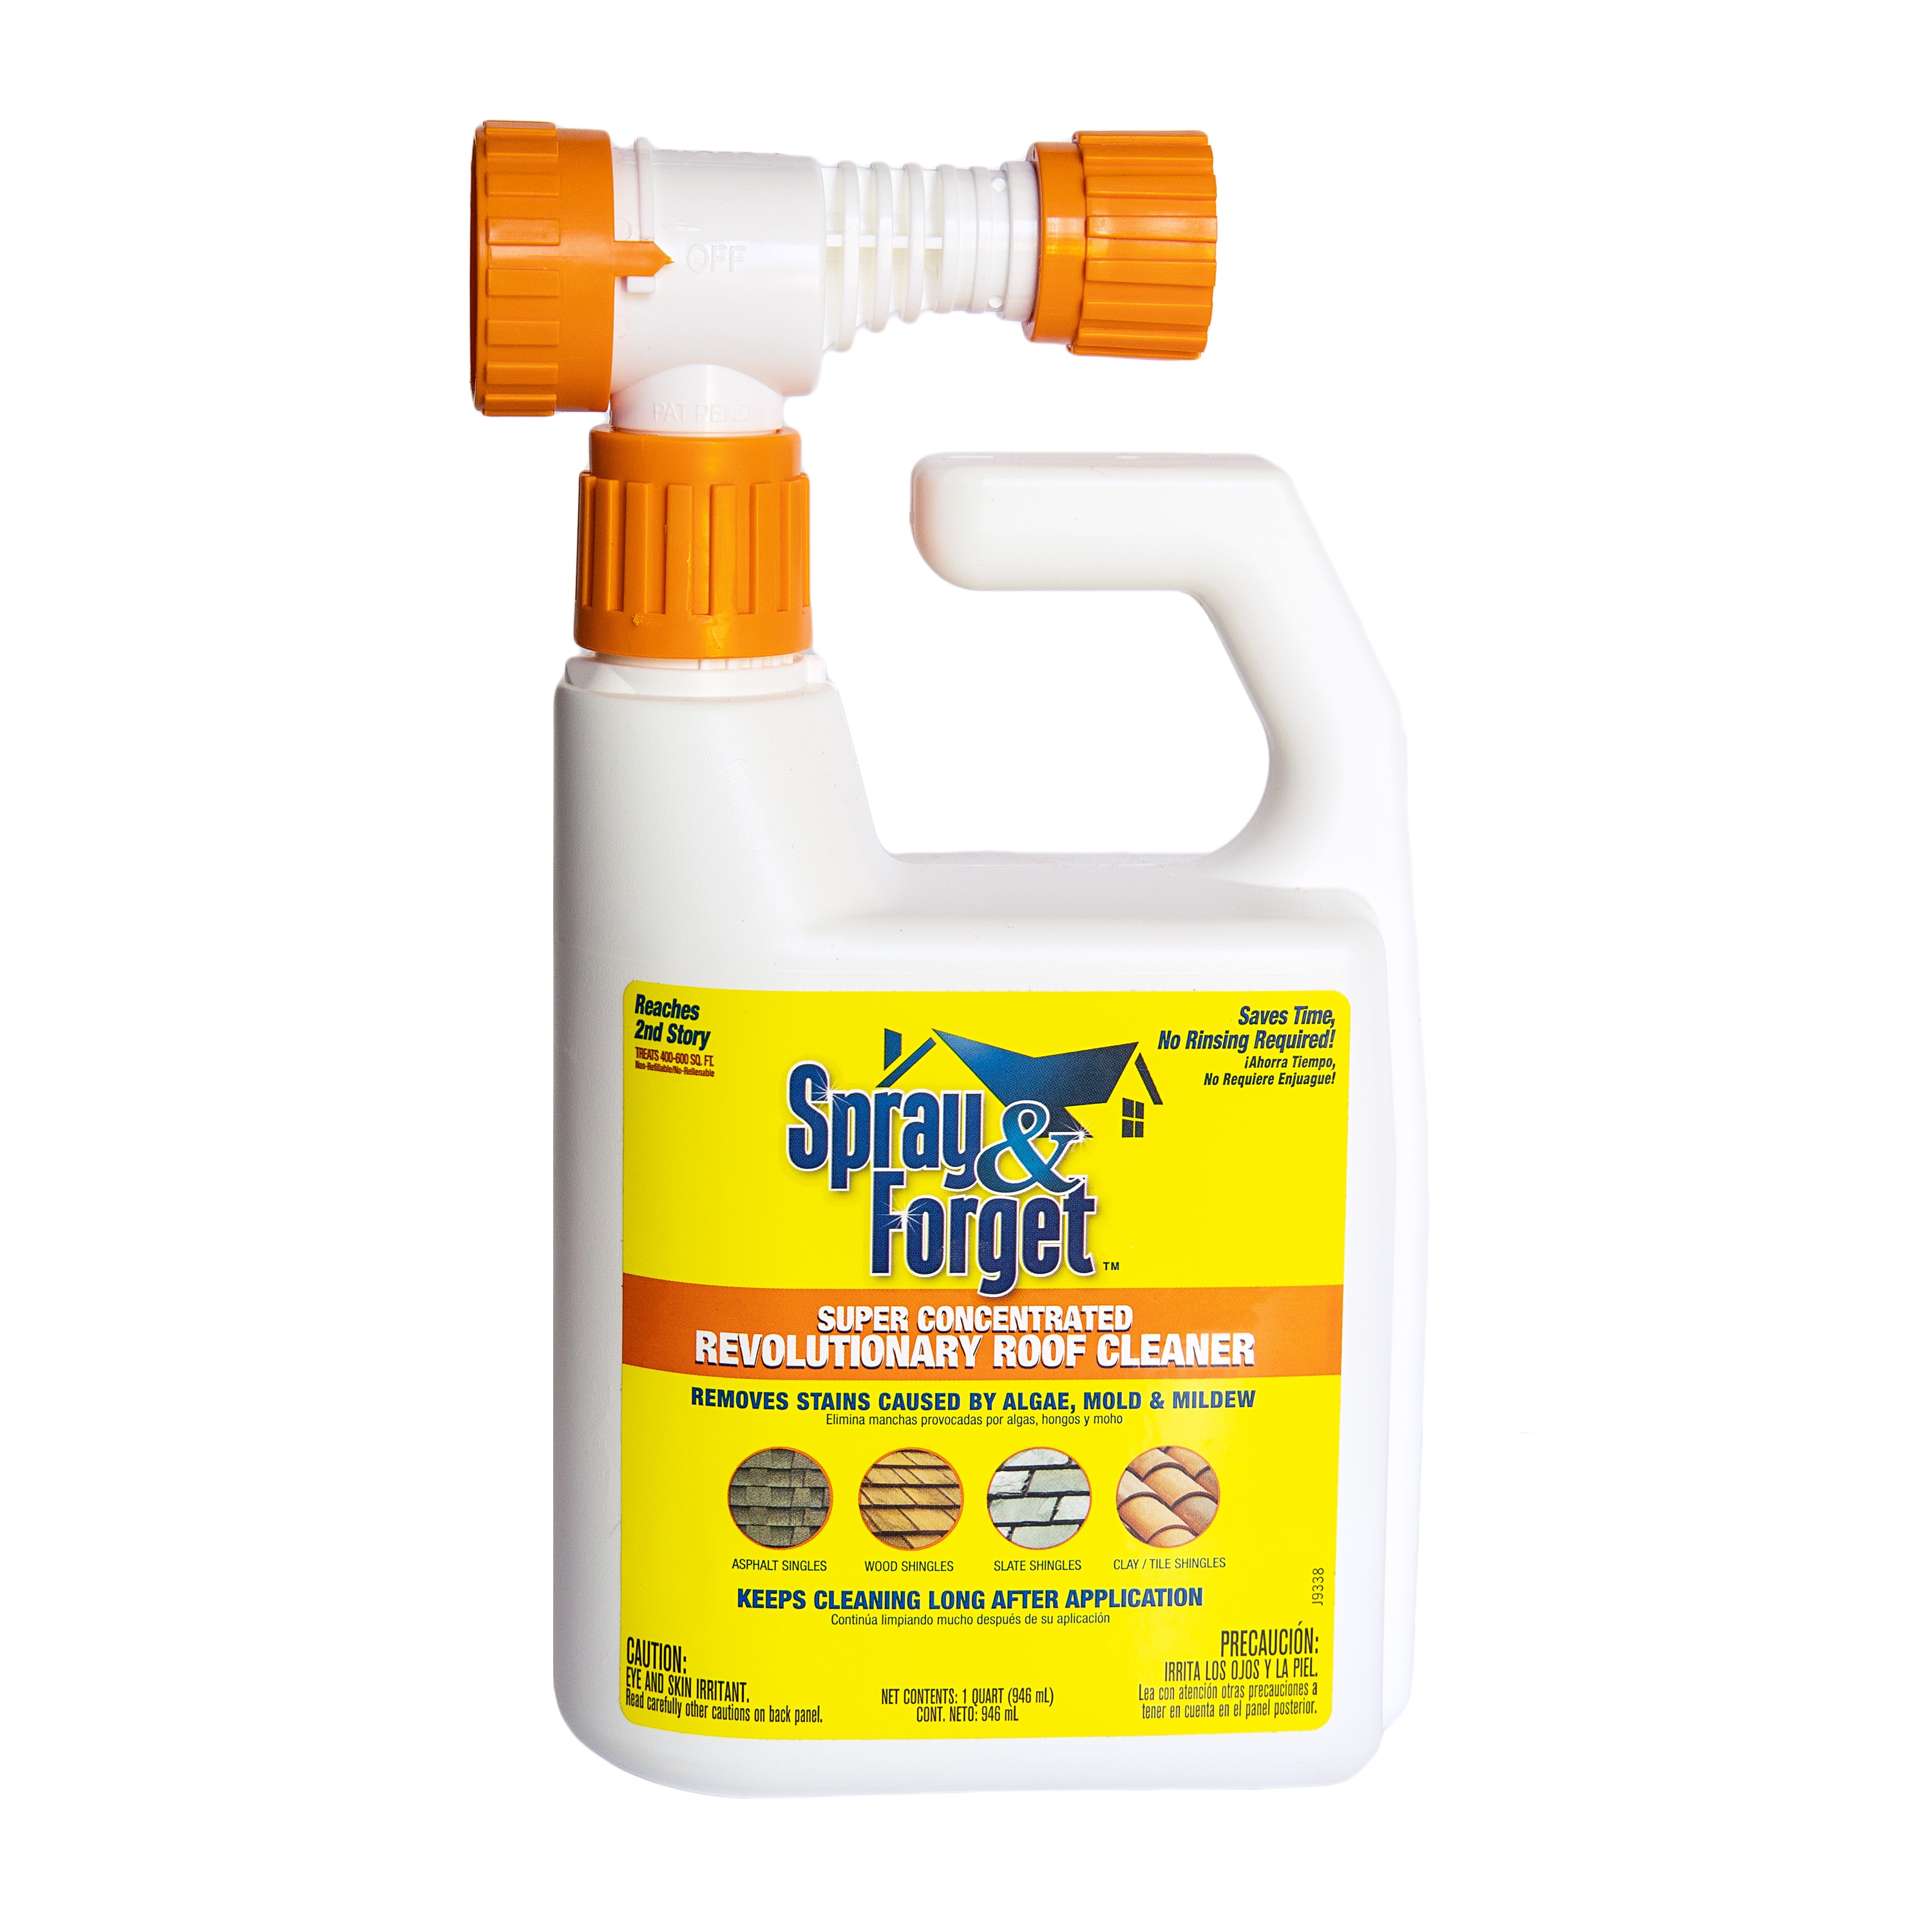 Wet & Forget Outdoor Ready to Use 64 oz., 2-pack